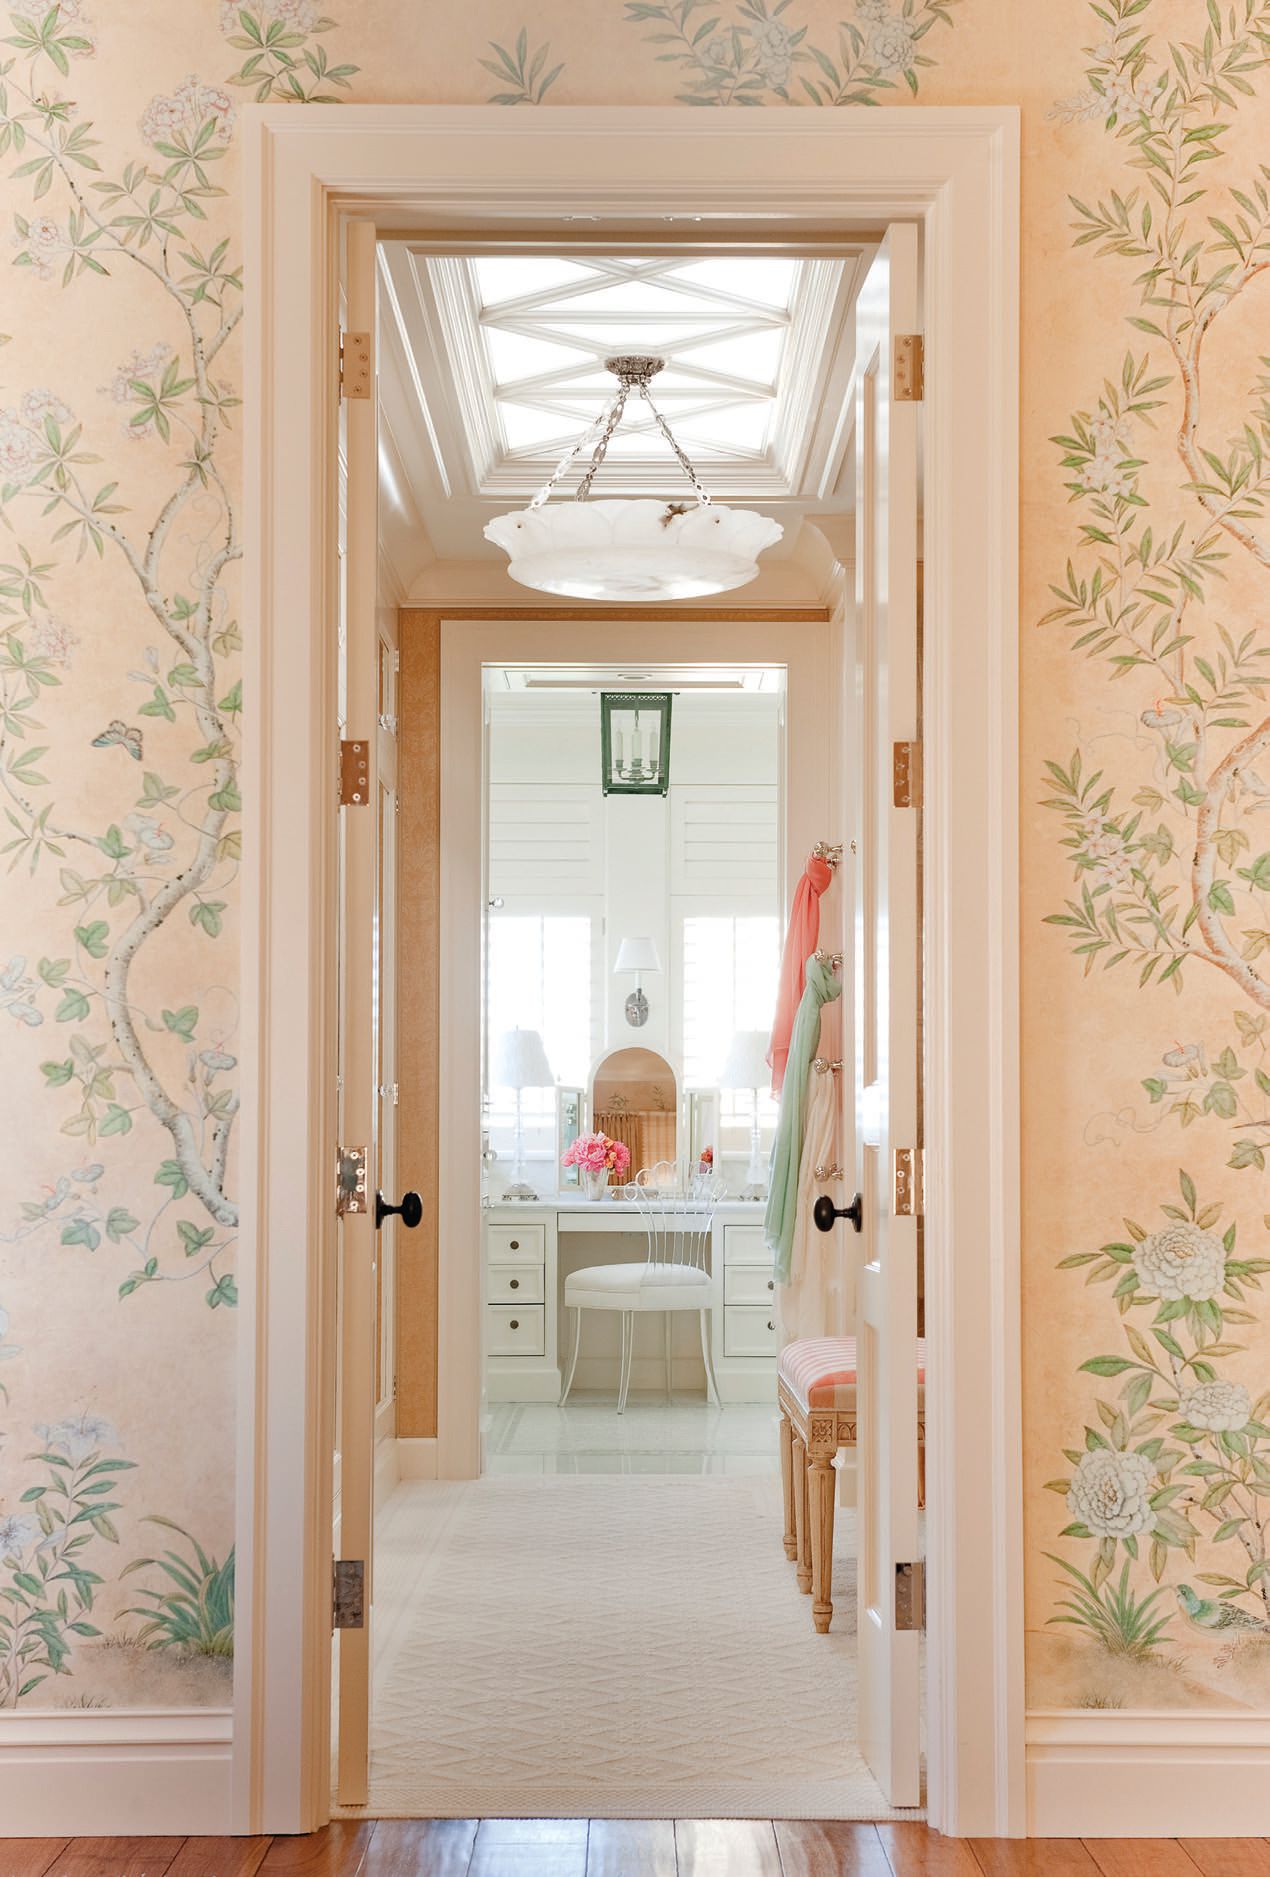 Subtle hues and florals mark the aesthetic of this Tucker project, another in a long line of spaces that tell a story about her clients. PHOTS BY EDWARD ADDEO